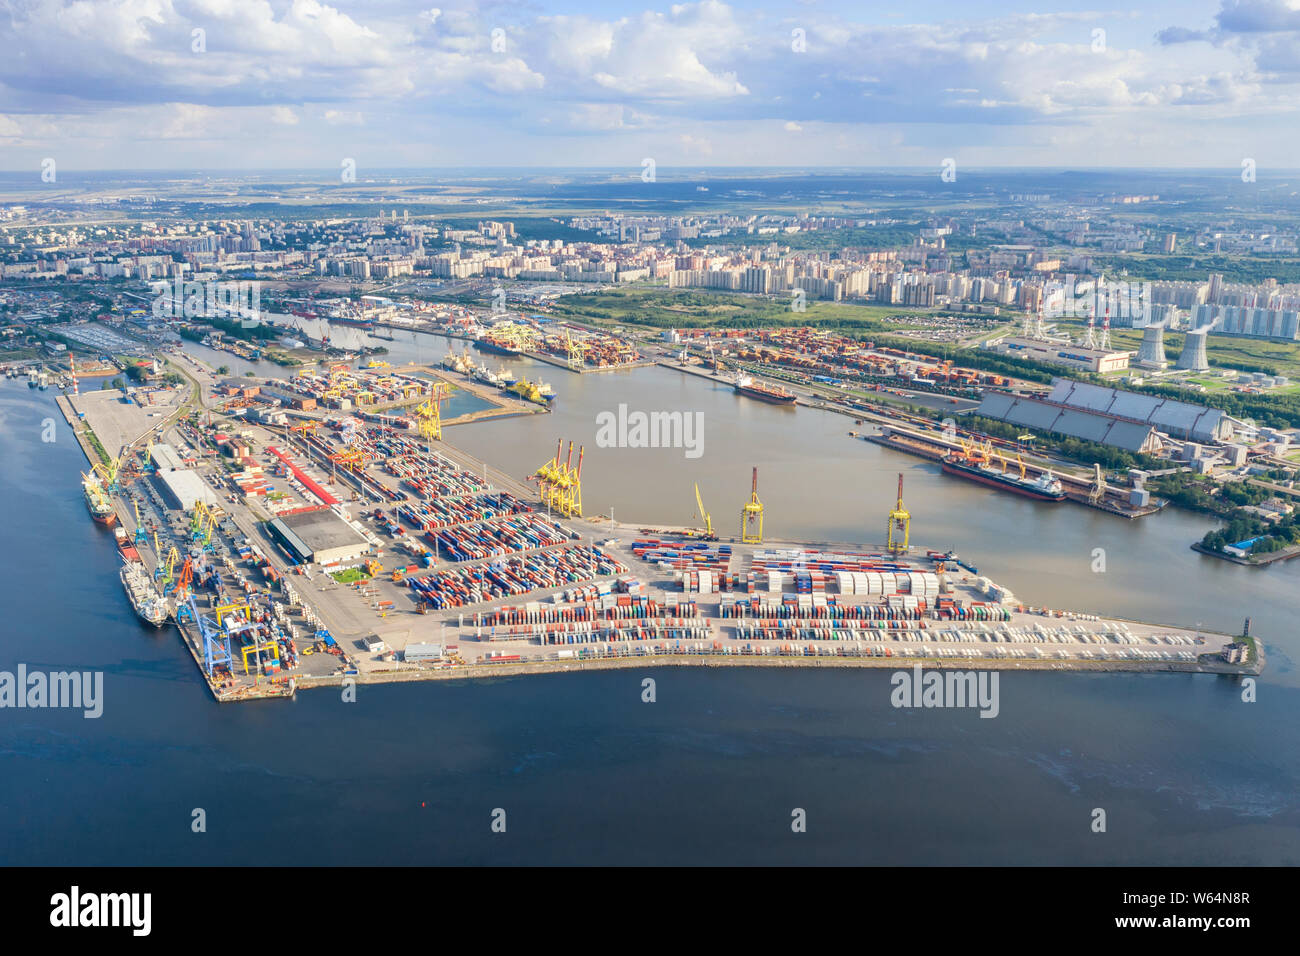 Aerial view on sea port with cargo containers in Saint Petersburg, Russia against distant city Stock Photo